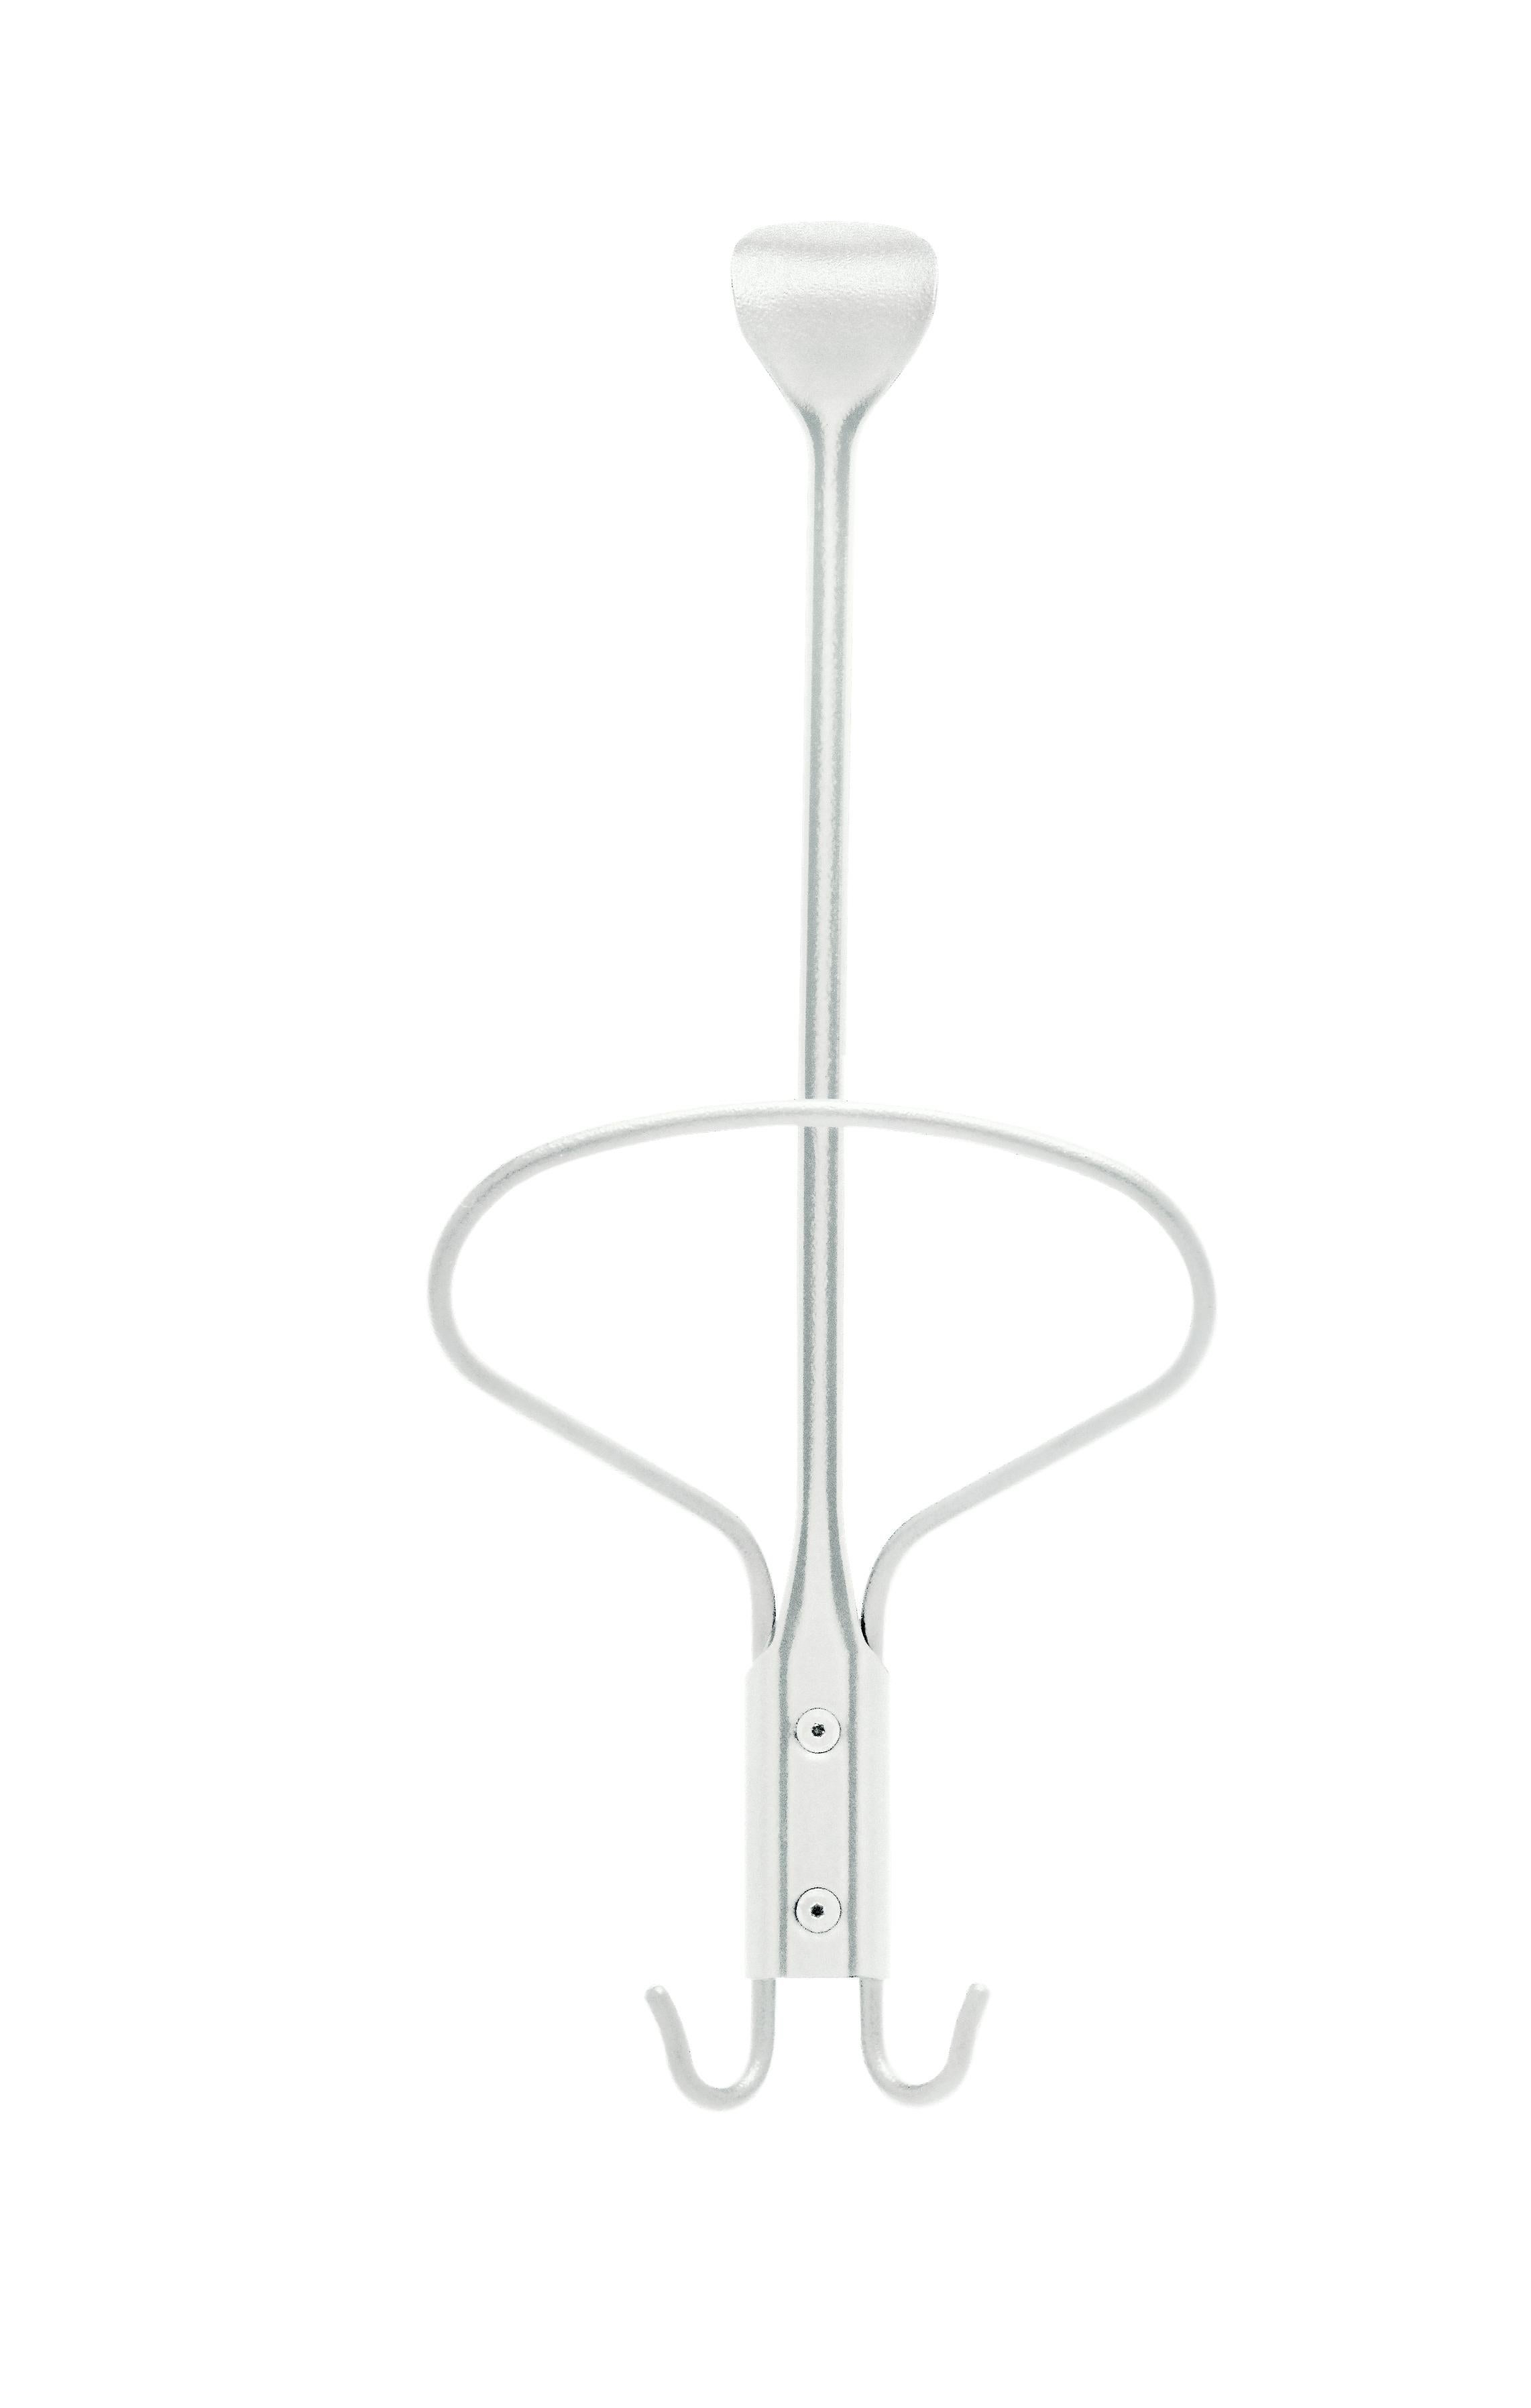 Zanotta Museo Coat Hanger in White Painted Steel with Scratch-Resistant Finish by Enzo Mari

Wall-mounted coat hanger single steel element, painted black or white with scratch- resistant finish. Available in black or white. The hat rack is sold in